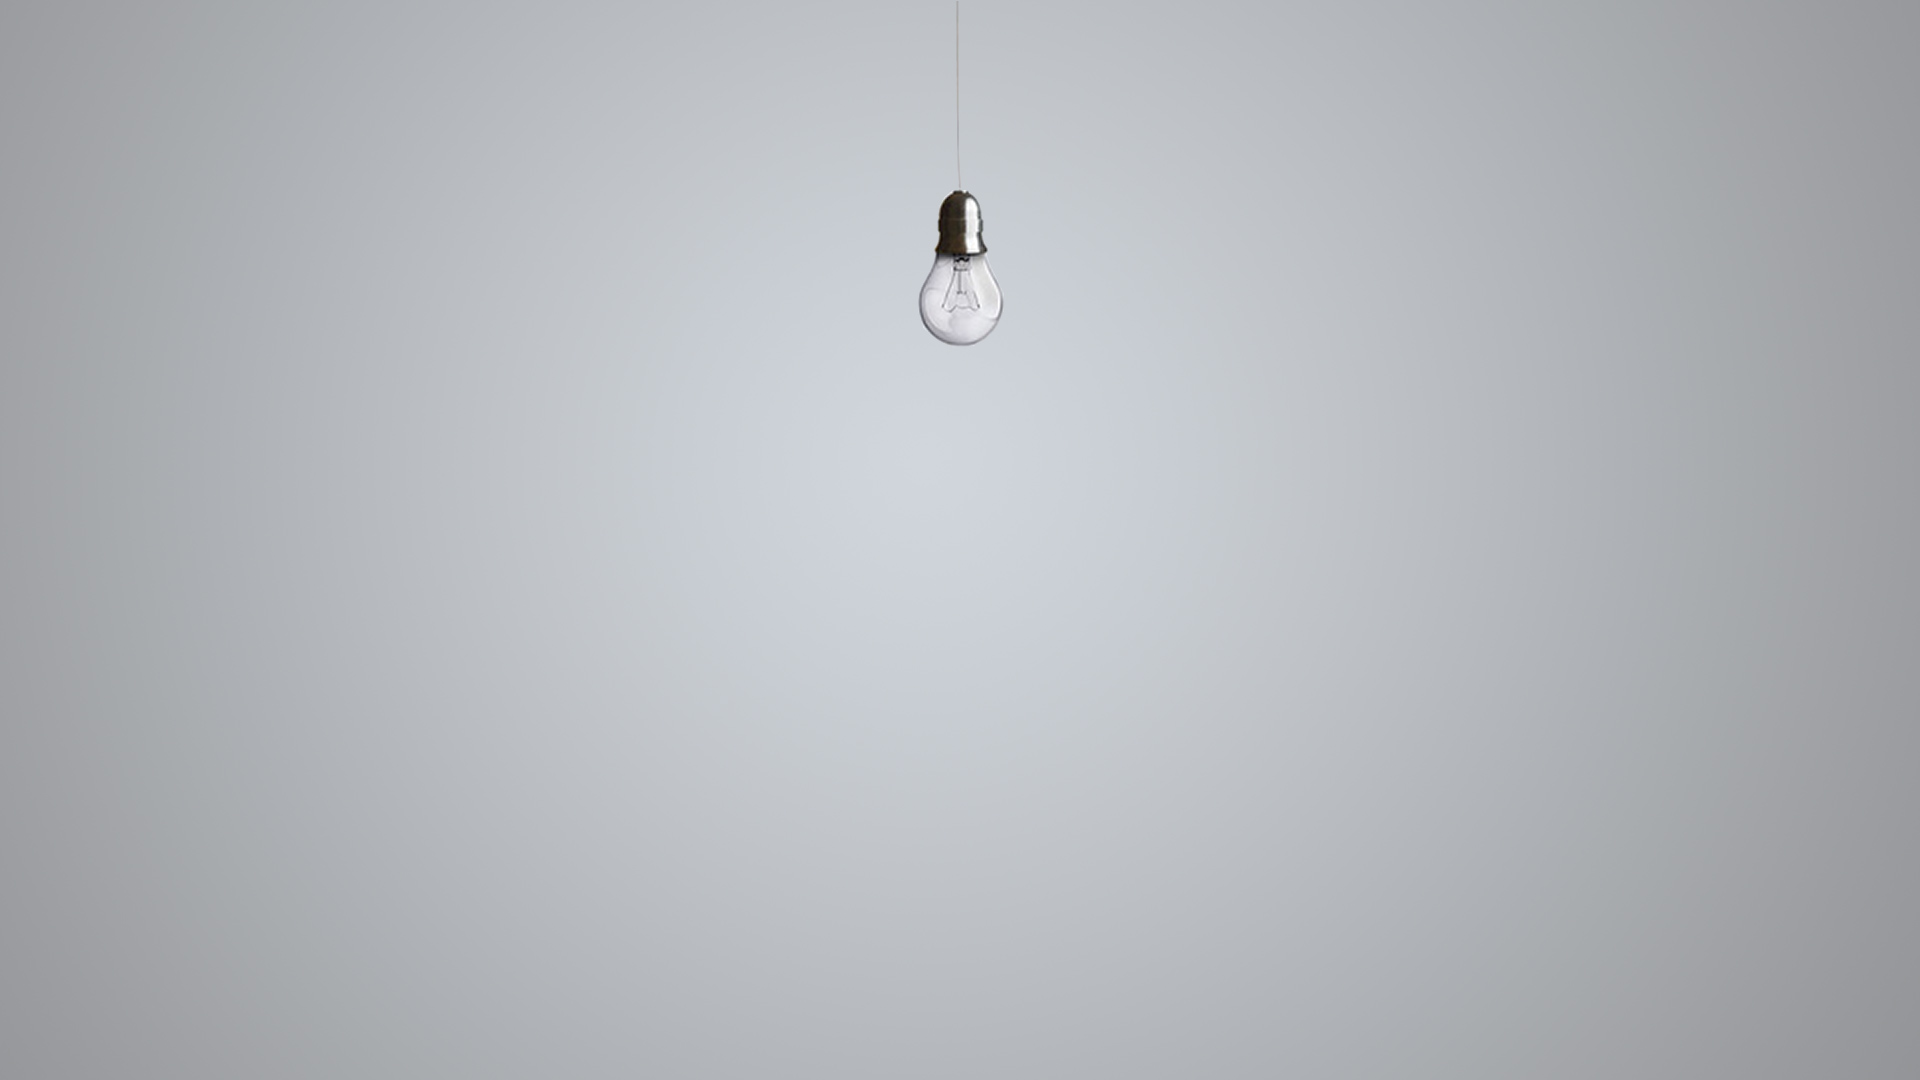 Silicon Valley - Bare Lighbulb background